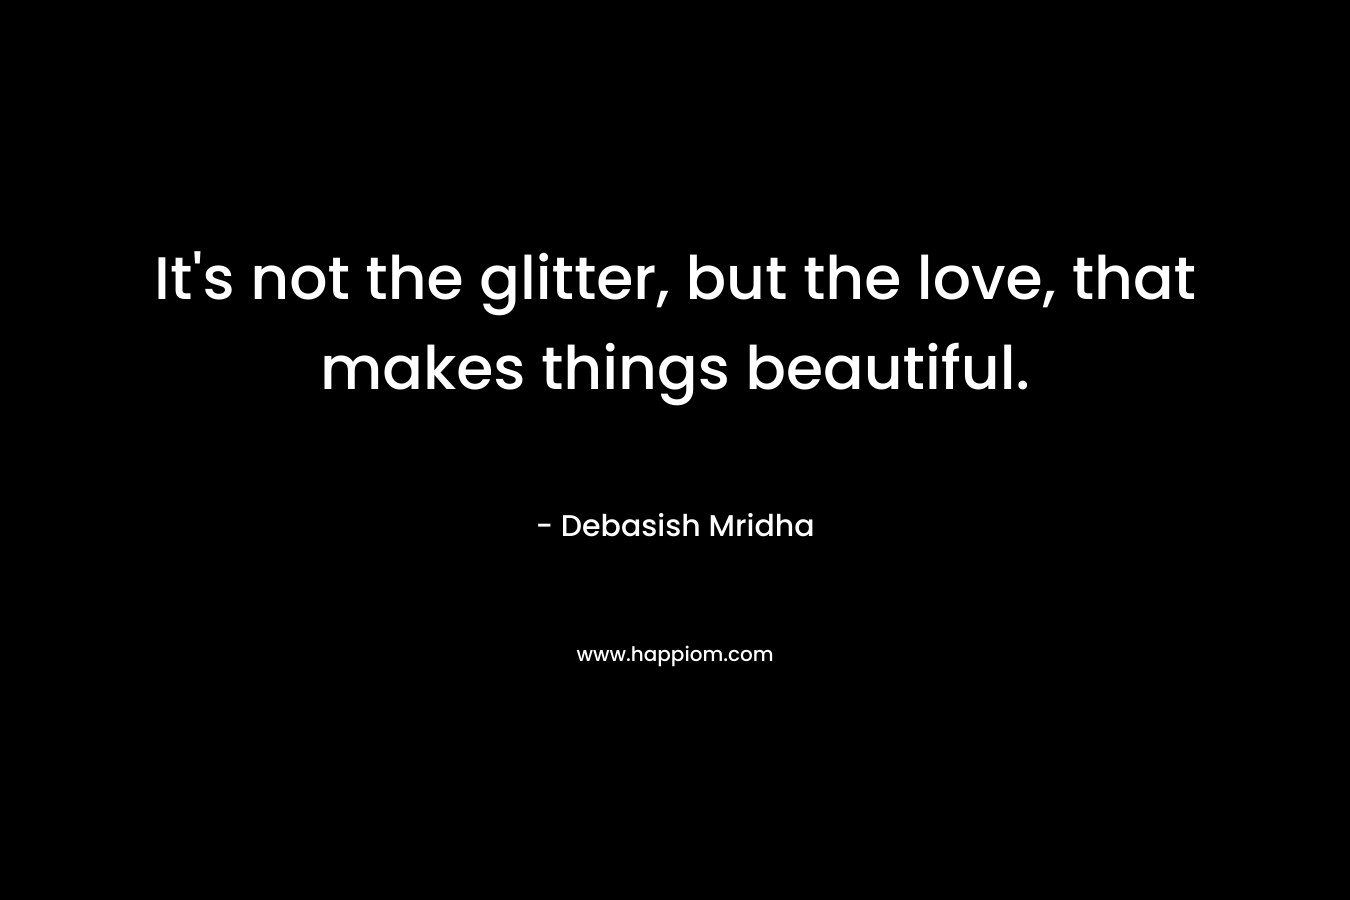 It's not the glitter, but the love, that makes things beautiful.